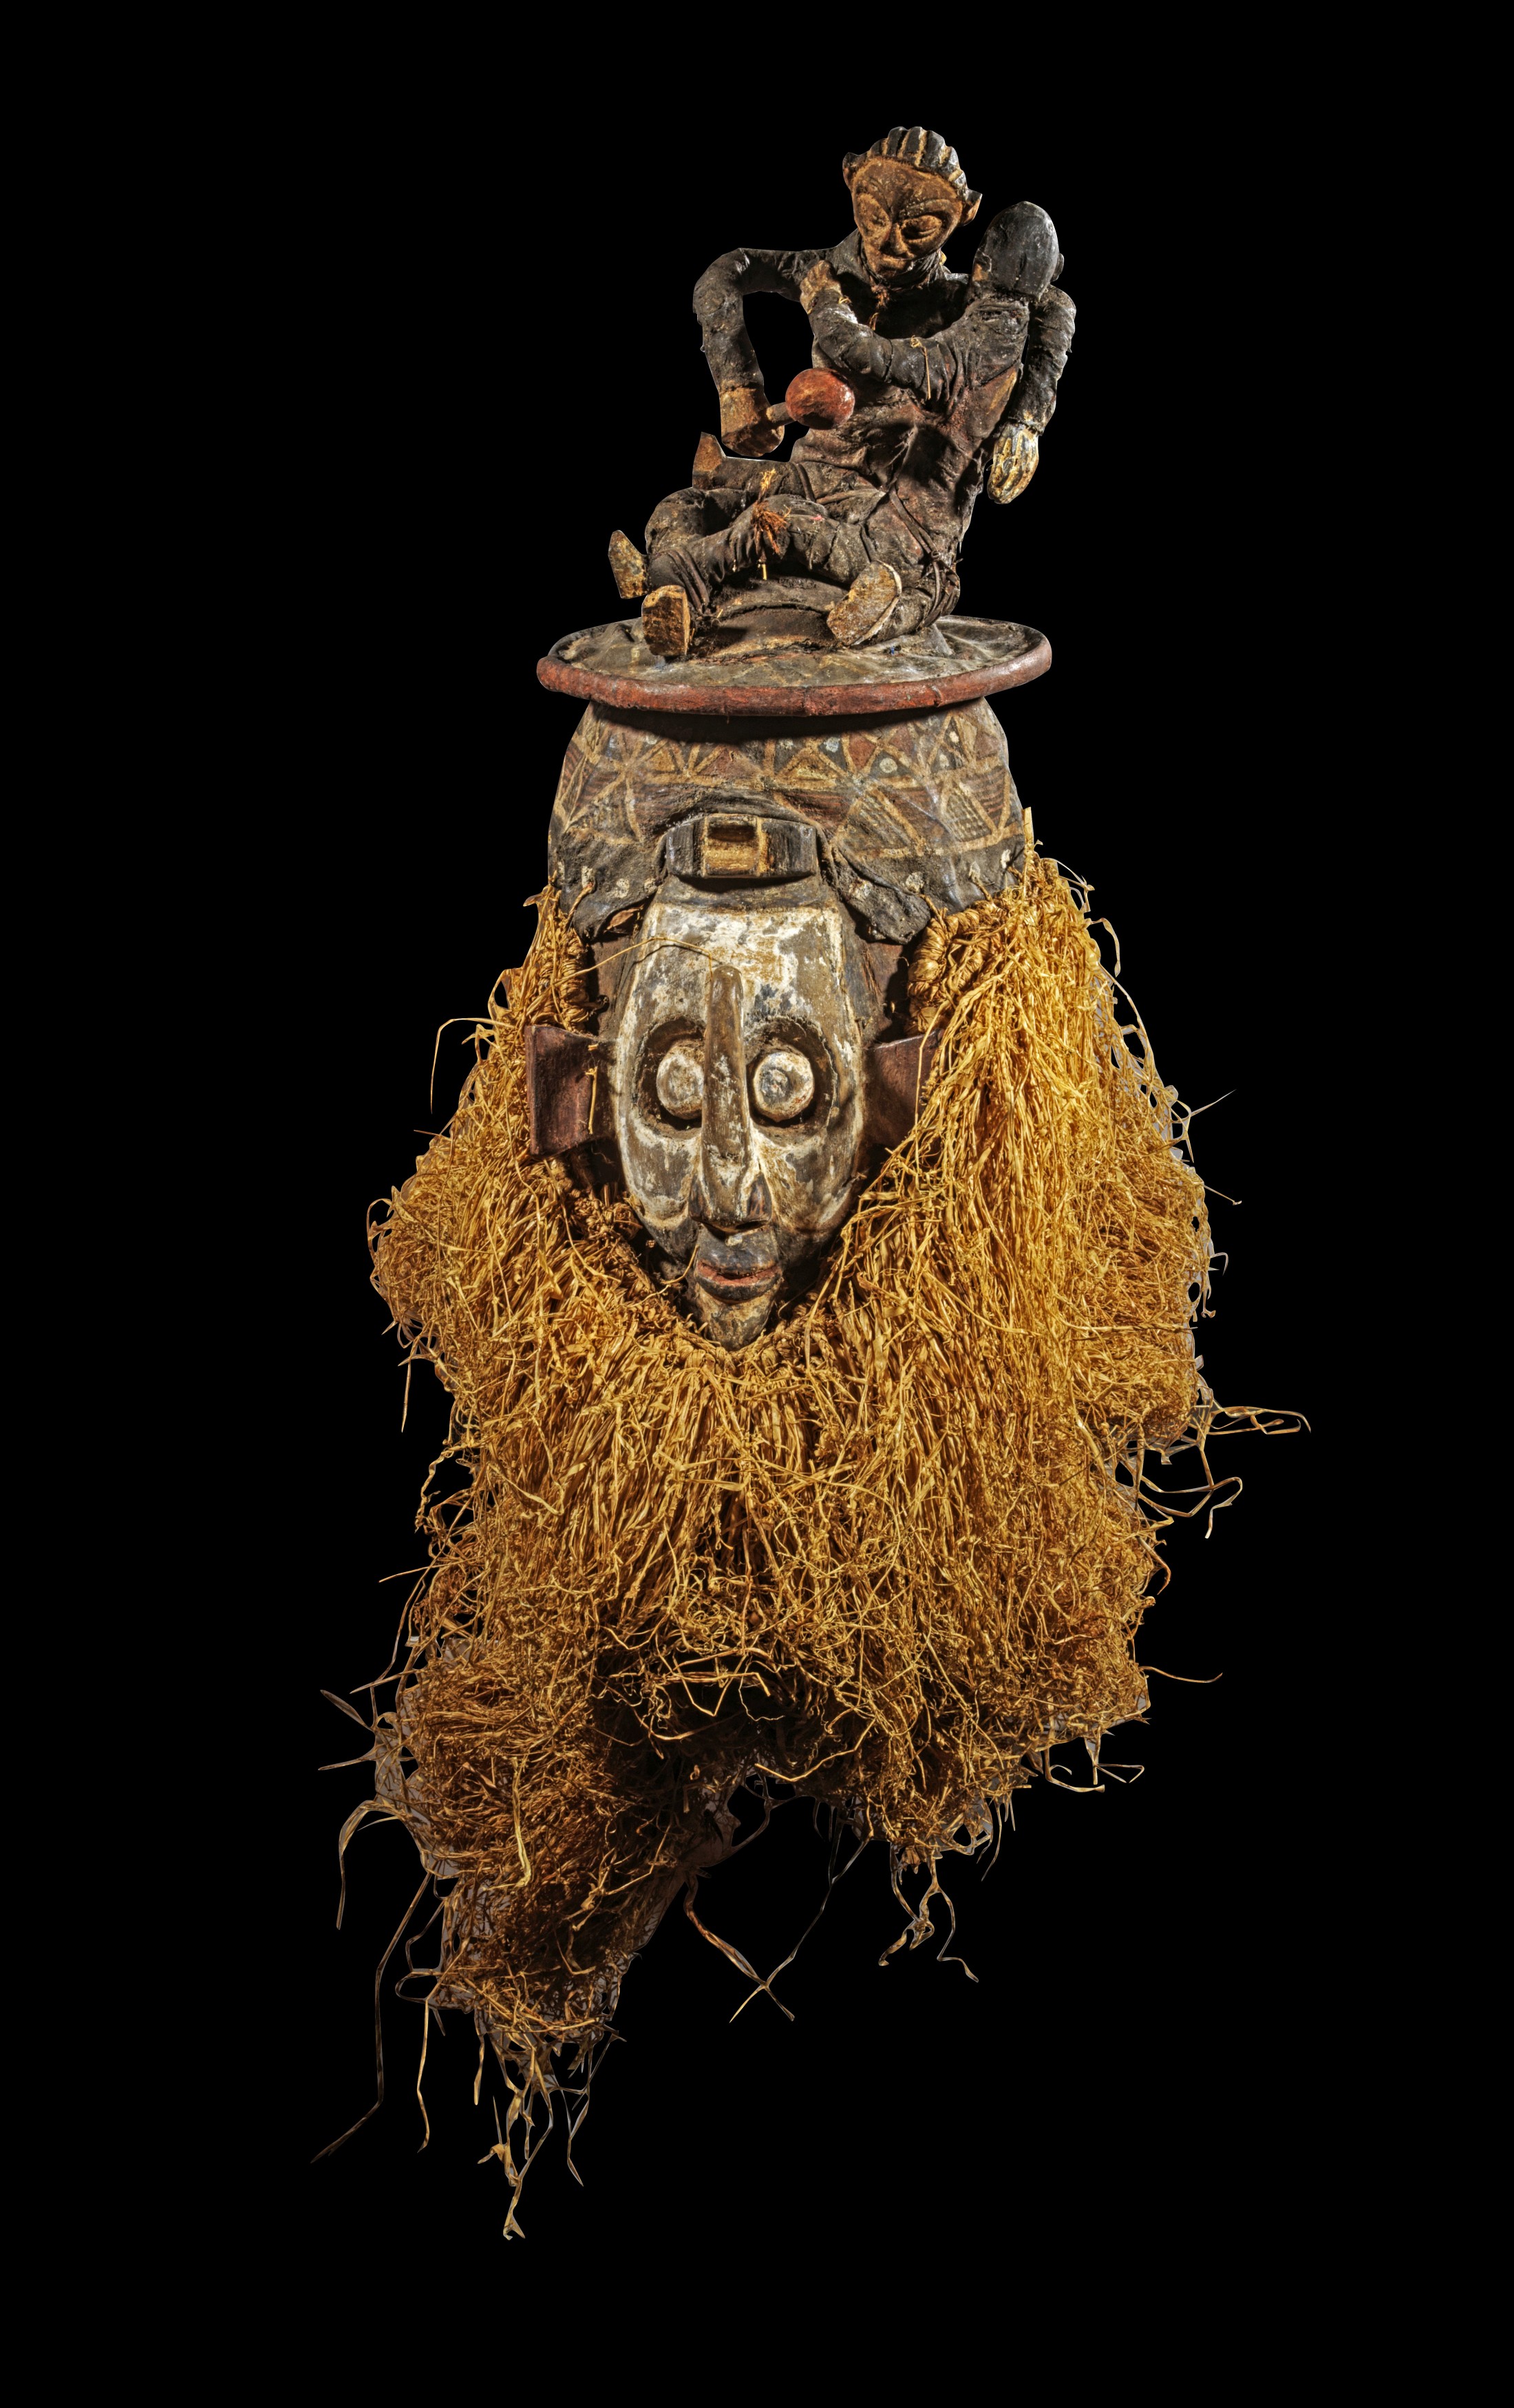 Initiation mask of the Yaka, D.R. Congo.